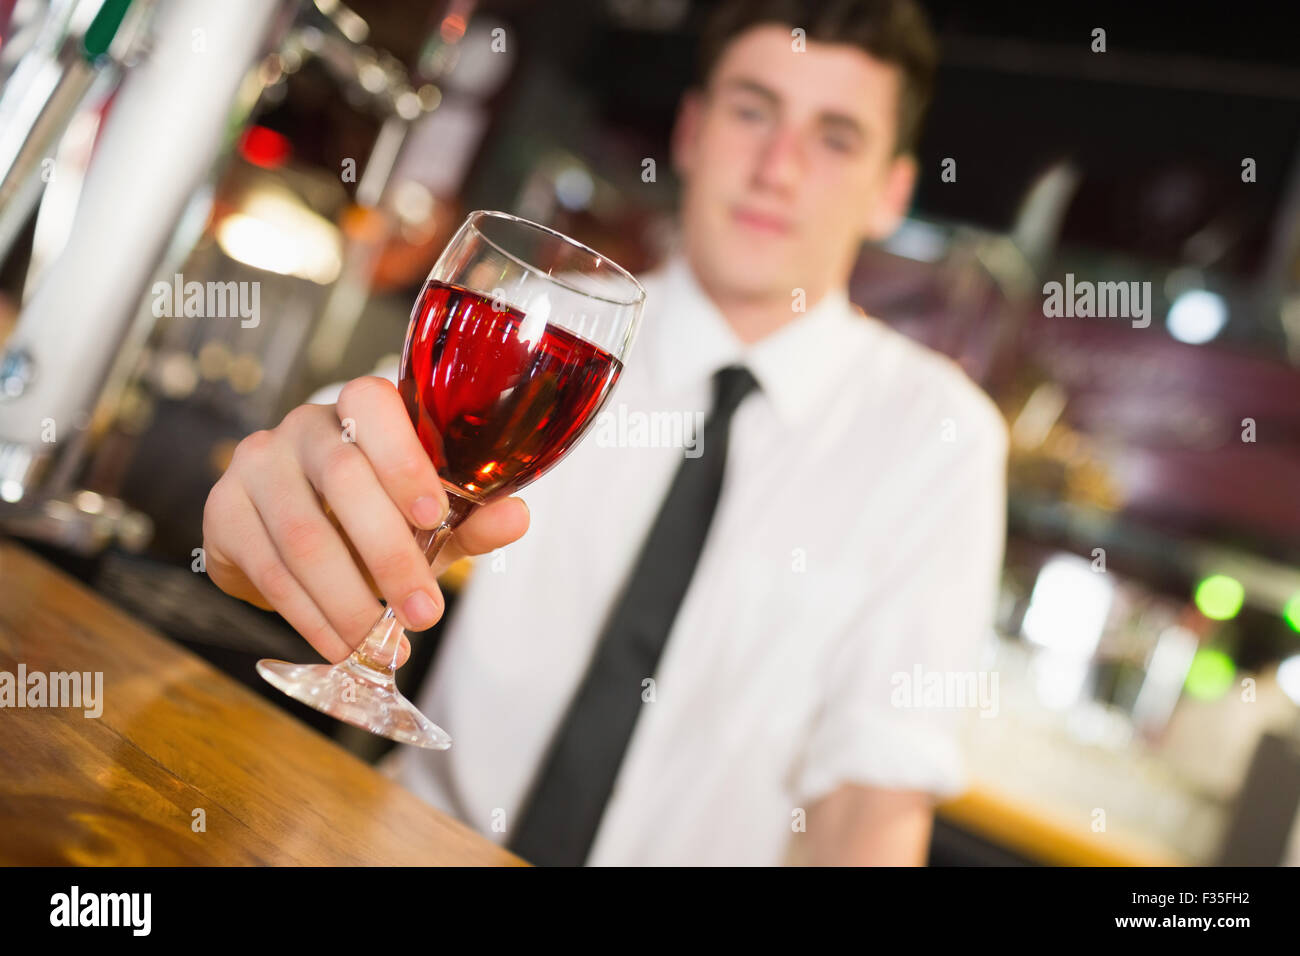 Male barkeepe serving alcohol Stock Photo